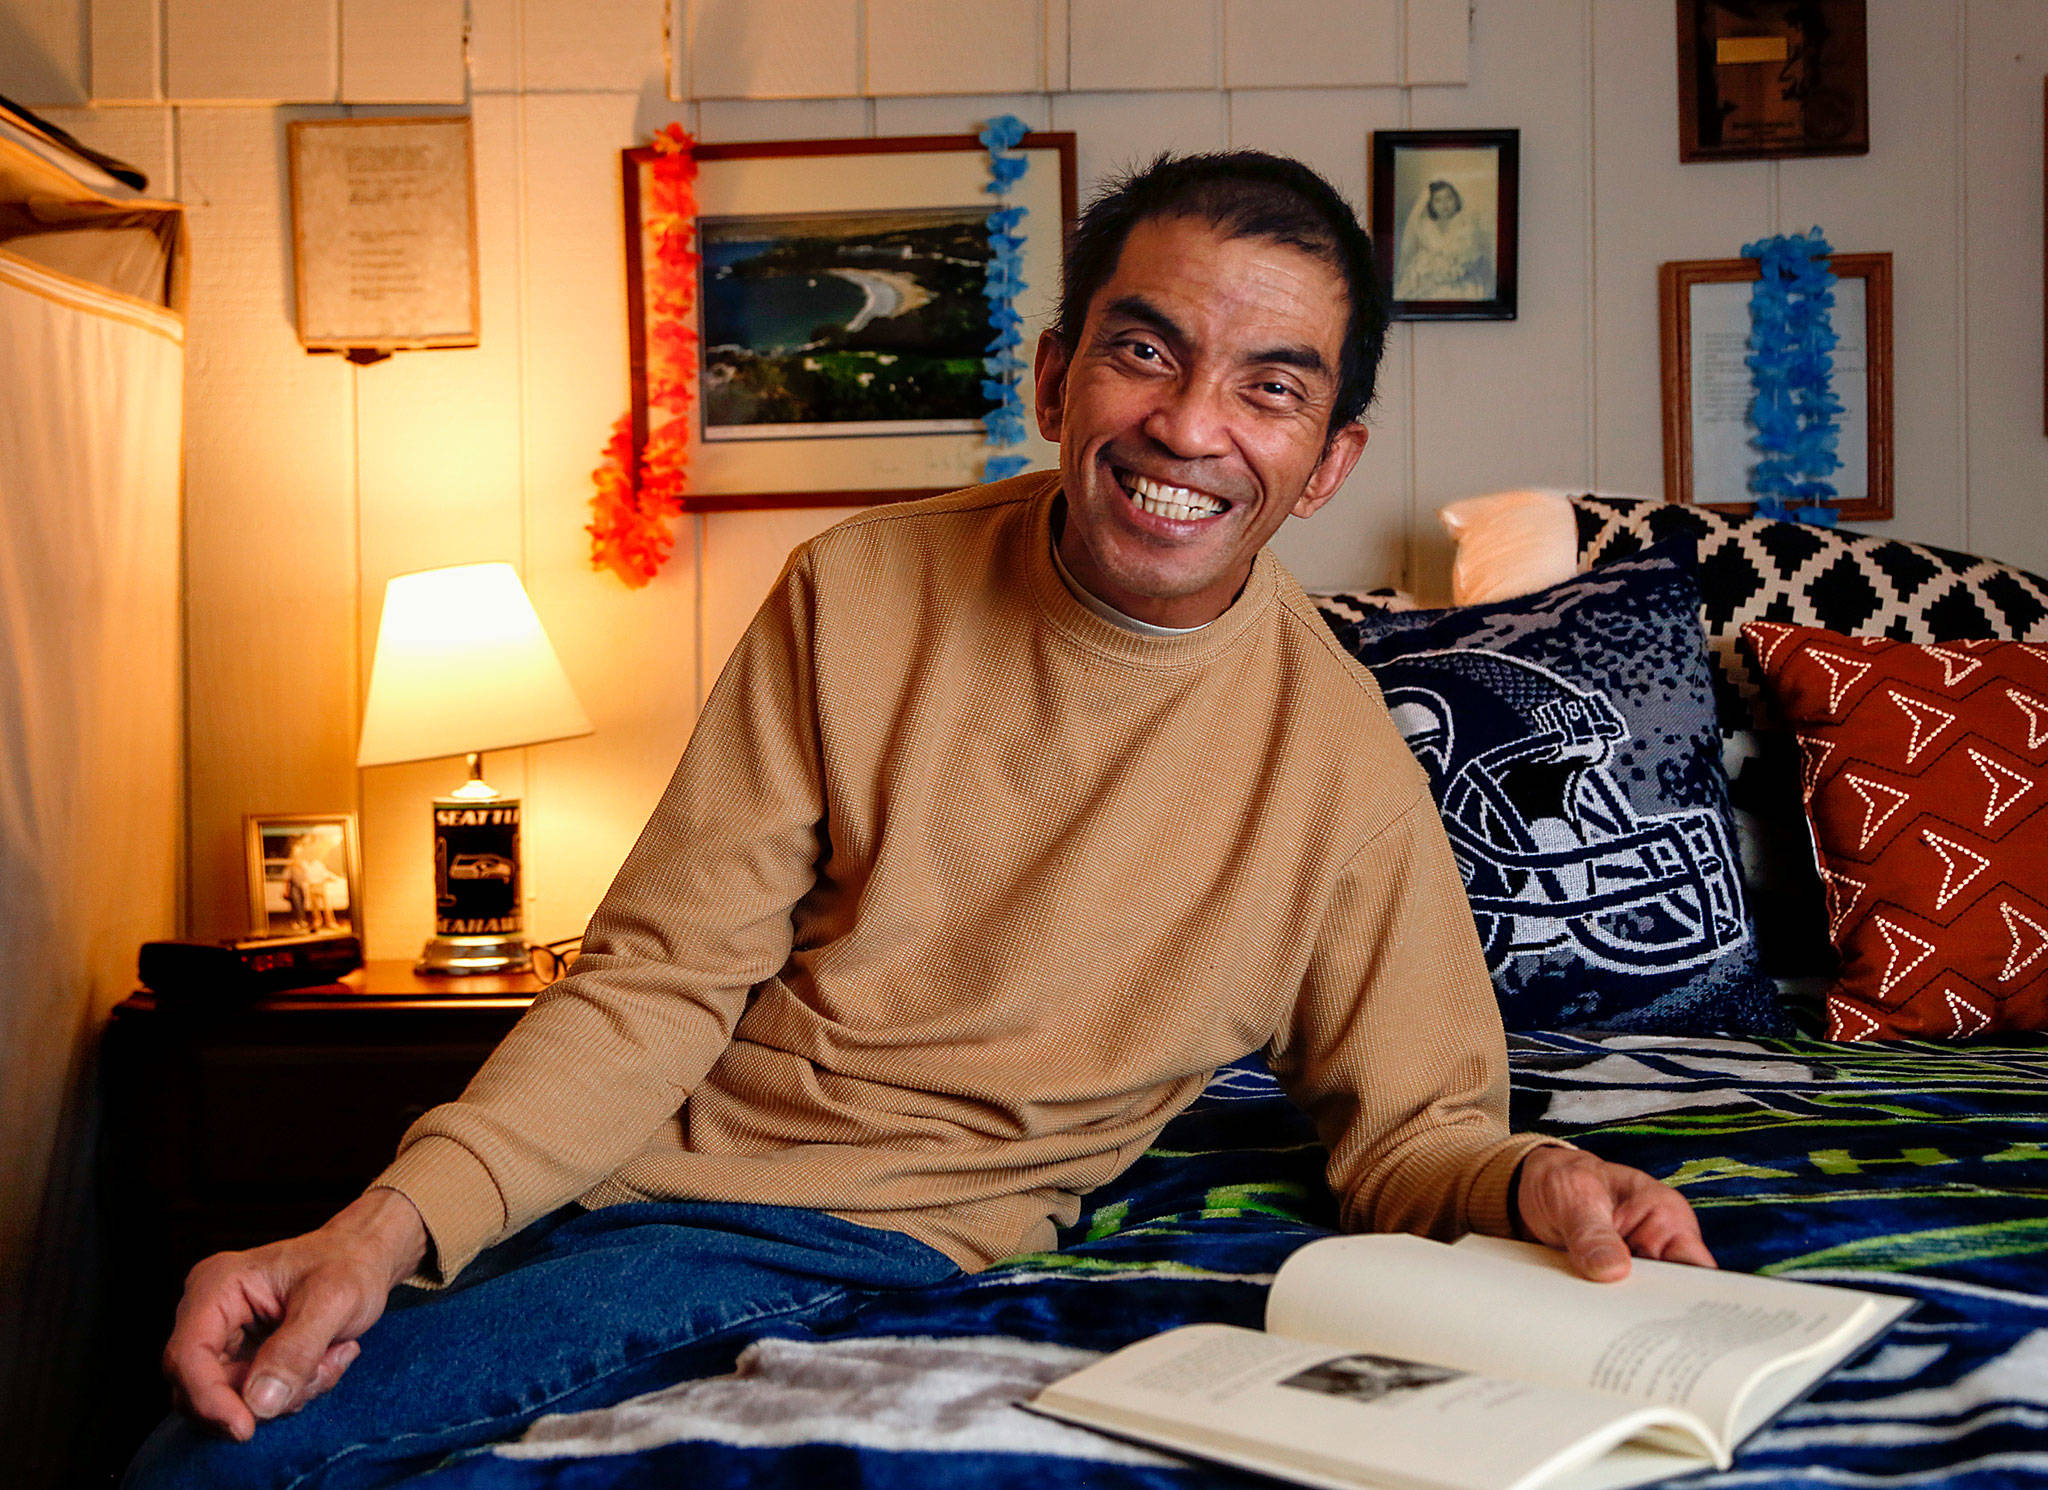 Adrian Patayon has a book signing on May 24 hosted by Arc of Snohomish County, an organization that supports people with disabilities and their families. Patayon, who has cerebral palsy and deals with depression and alcoholism, is the author of the book “Adrian’s Aloha Song.” (Dan Bates / The Herald)